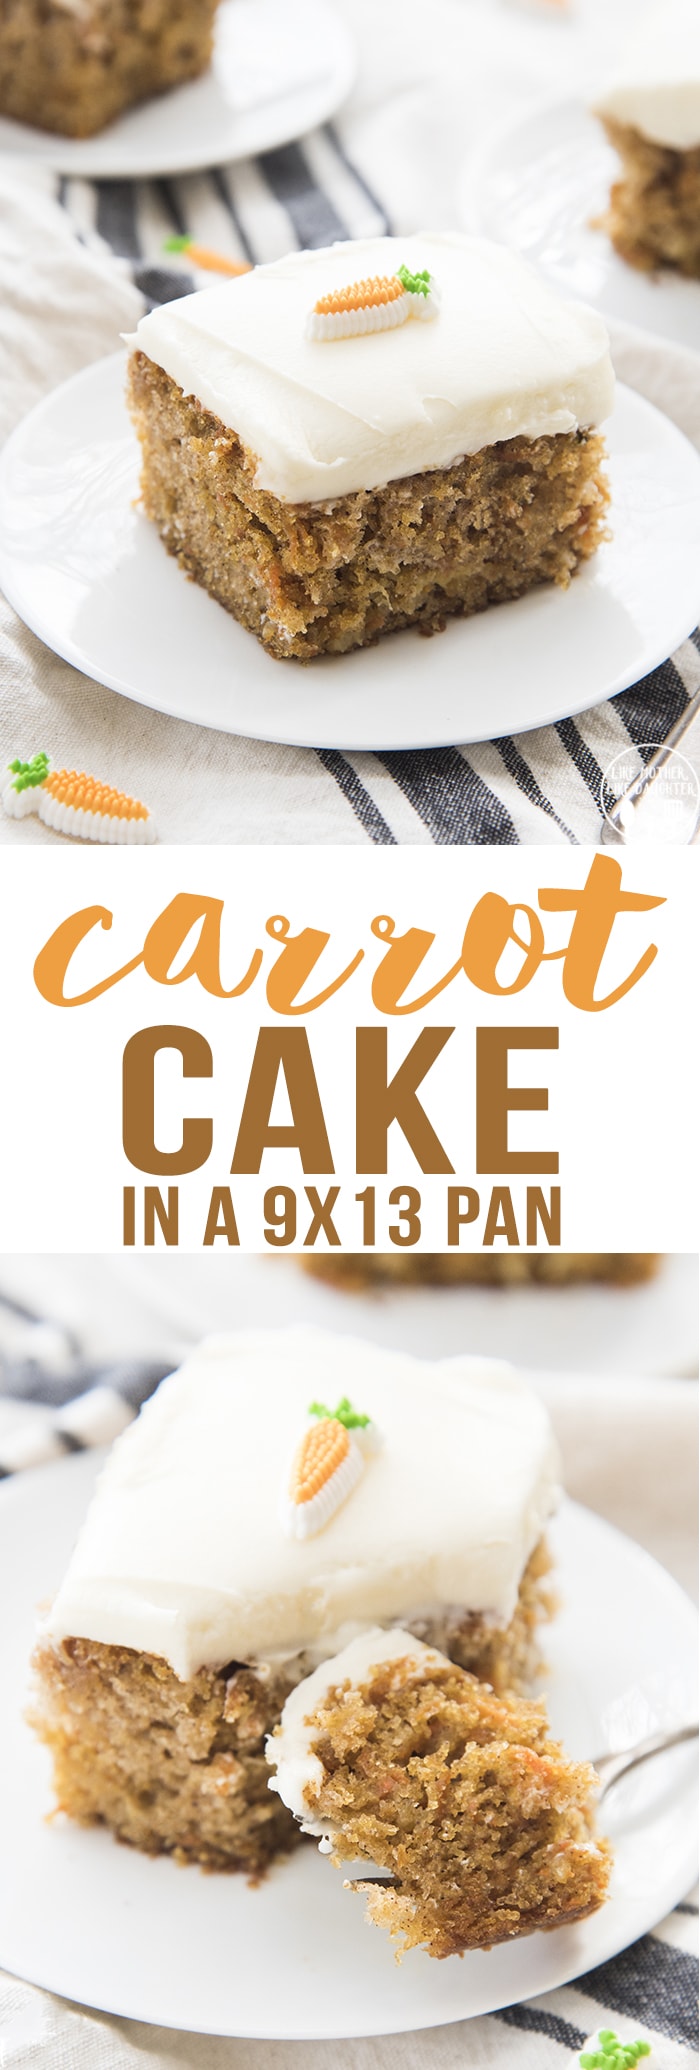 This easy carrot cake is made in a 9x13 pan and topped with the best cream cheese frosting! Perfect for an Easter dessert!